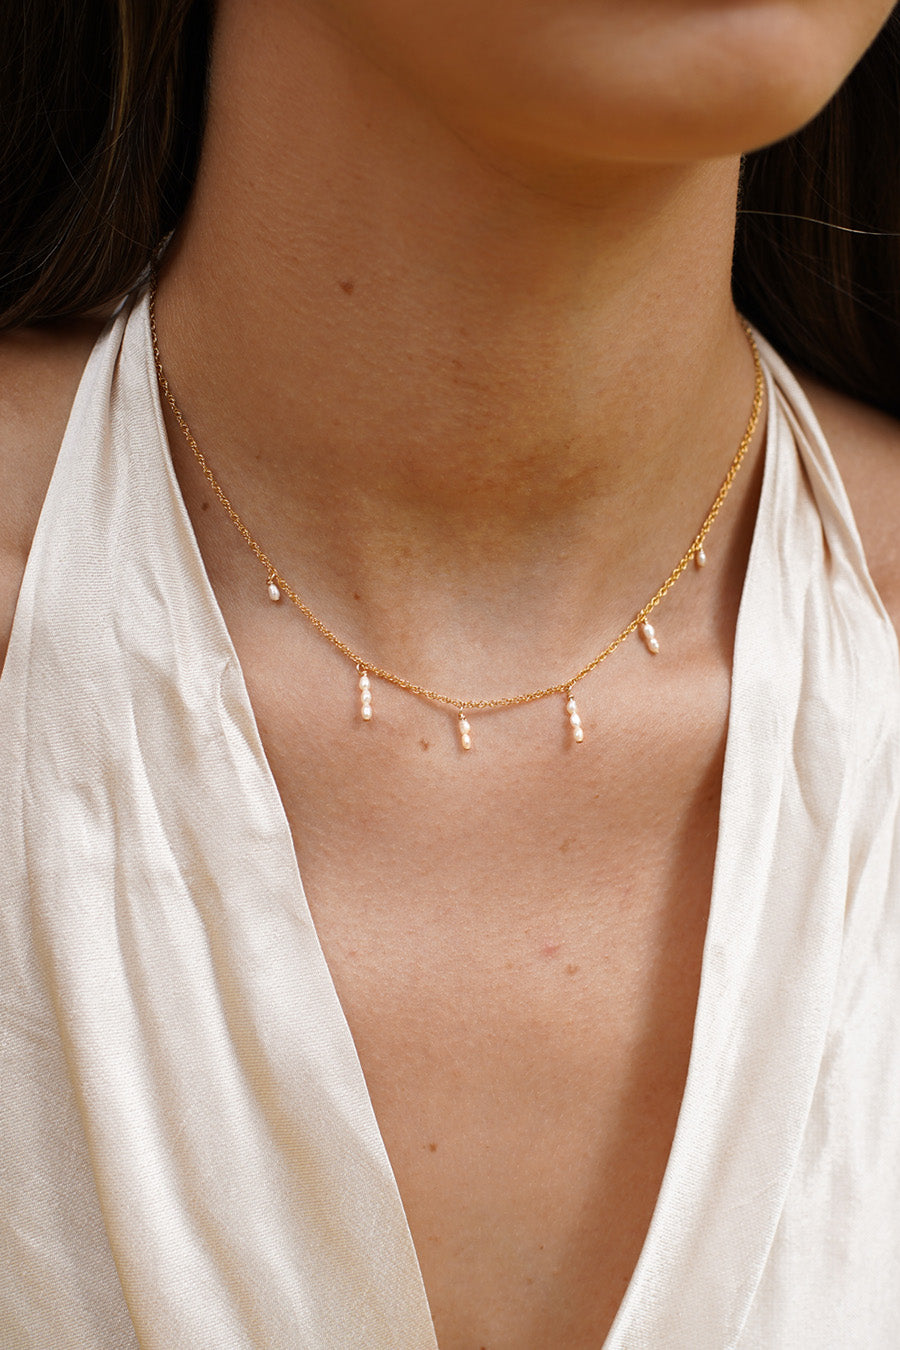 Ani Pearl Droplets Necklace